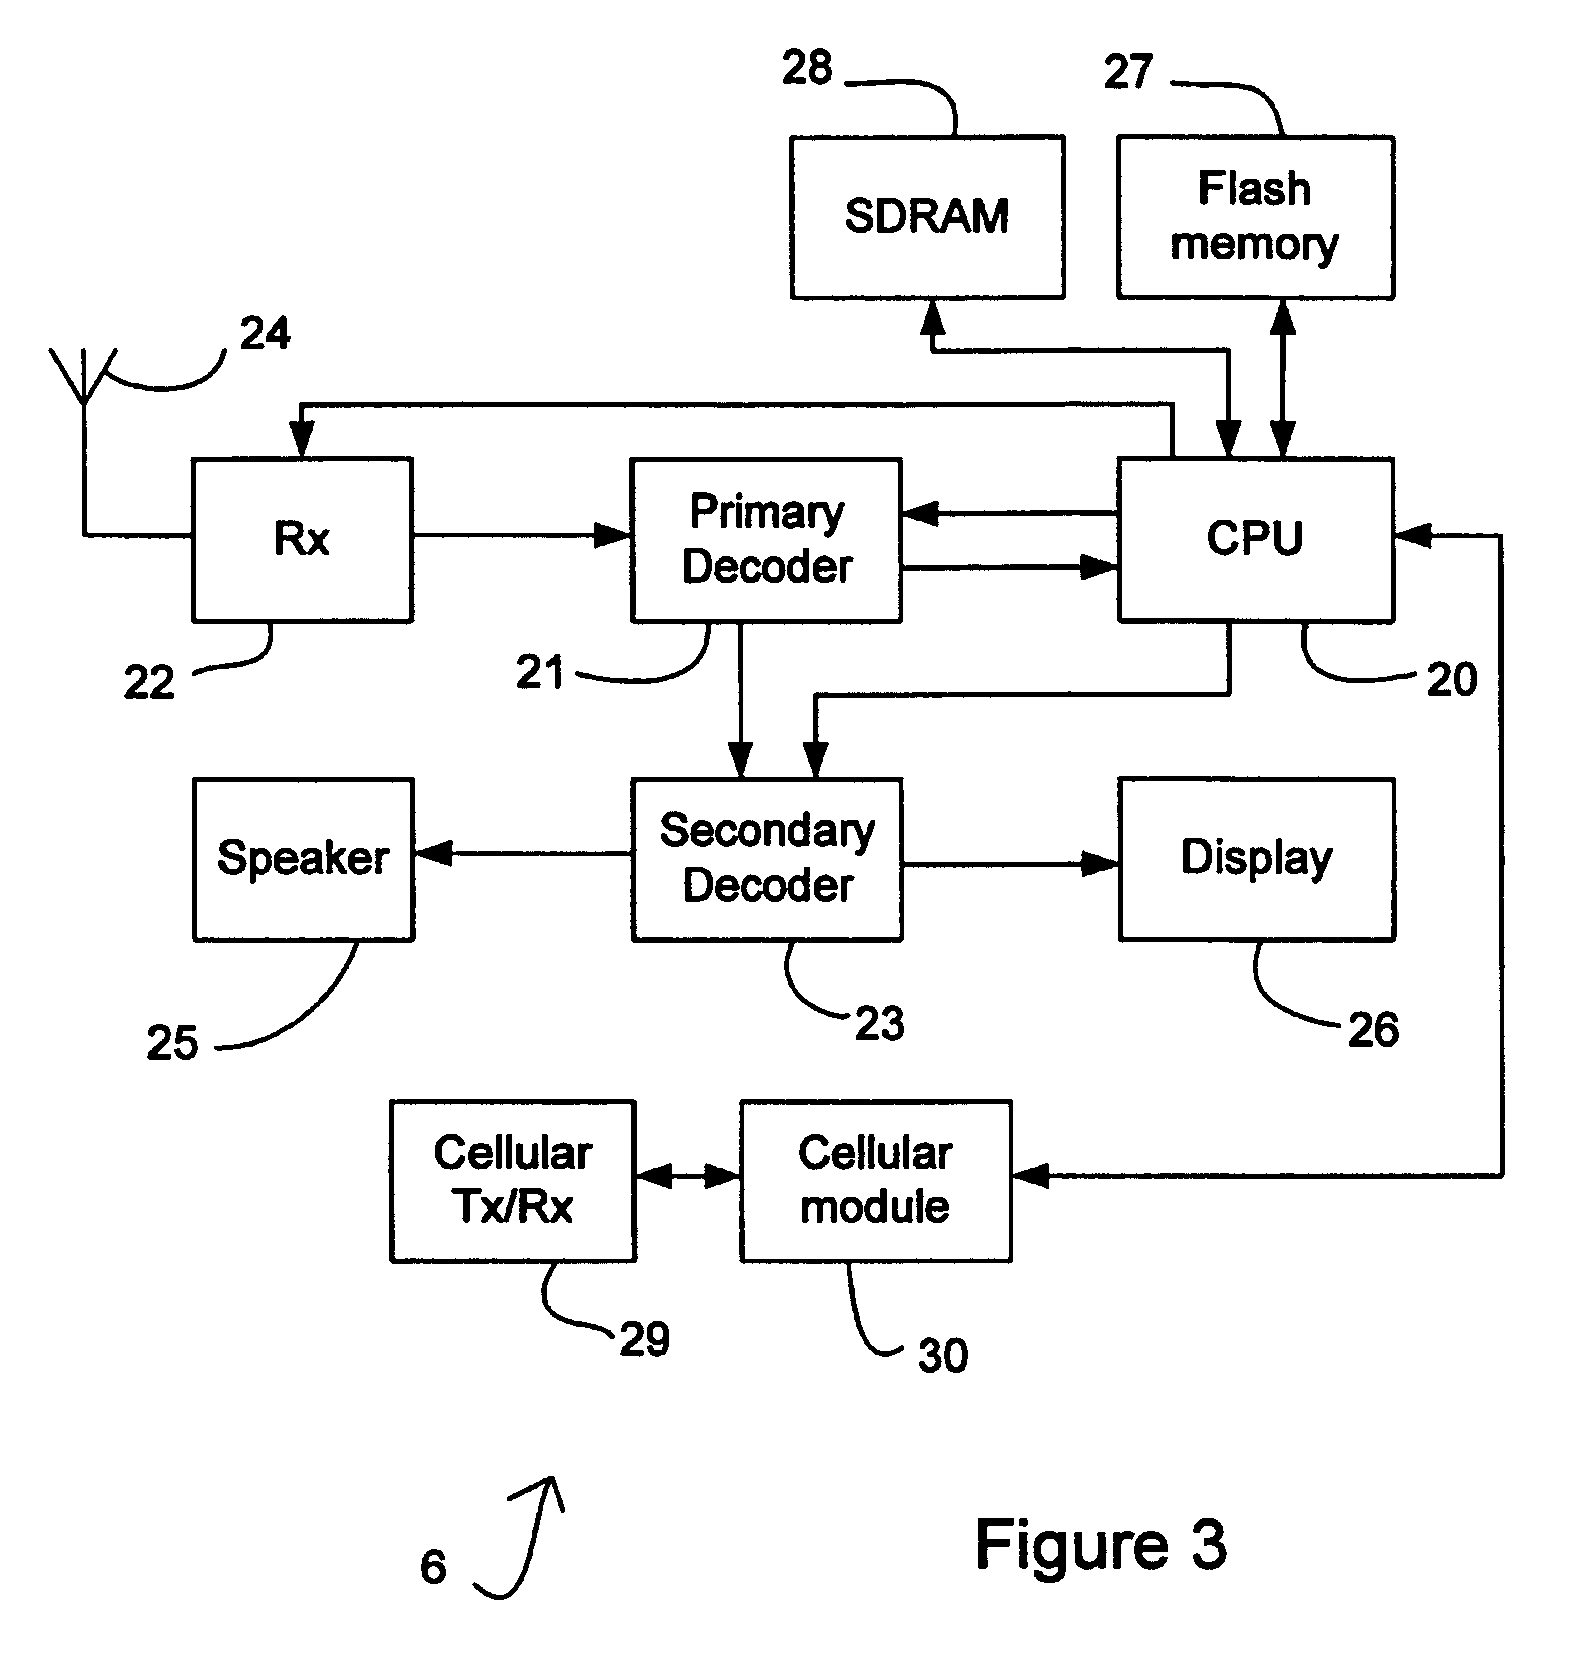 Method and system to improve handover between mobile video networks and cells